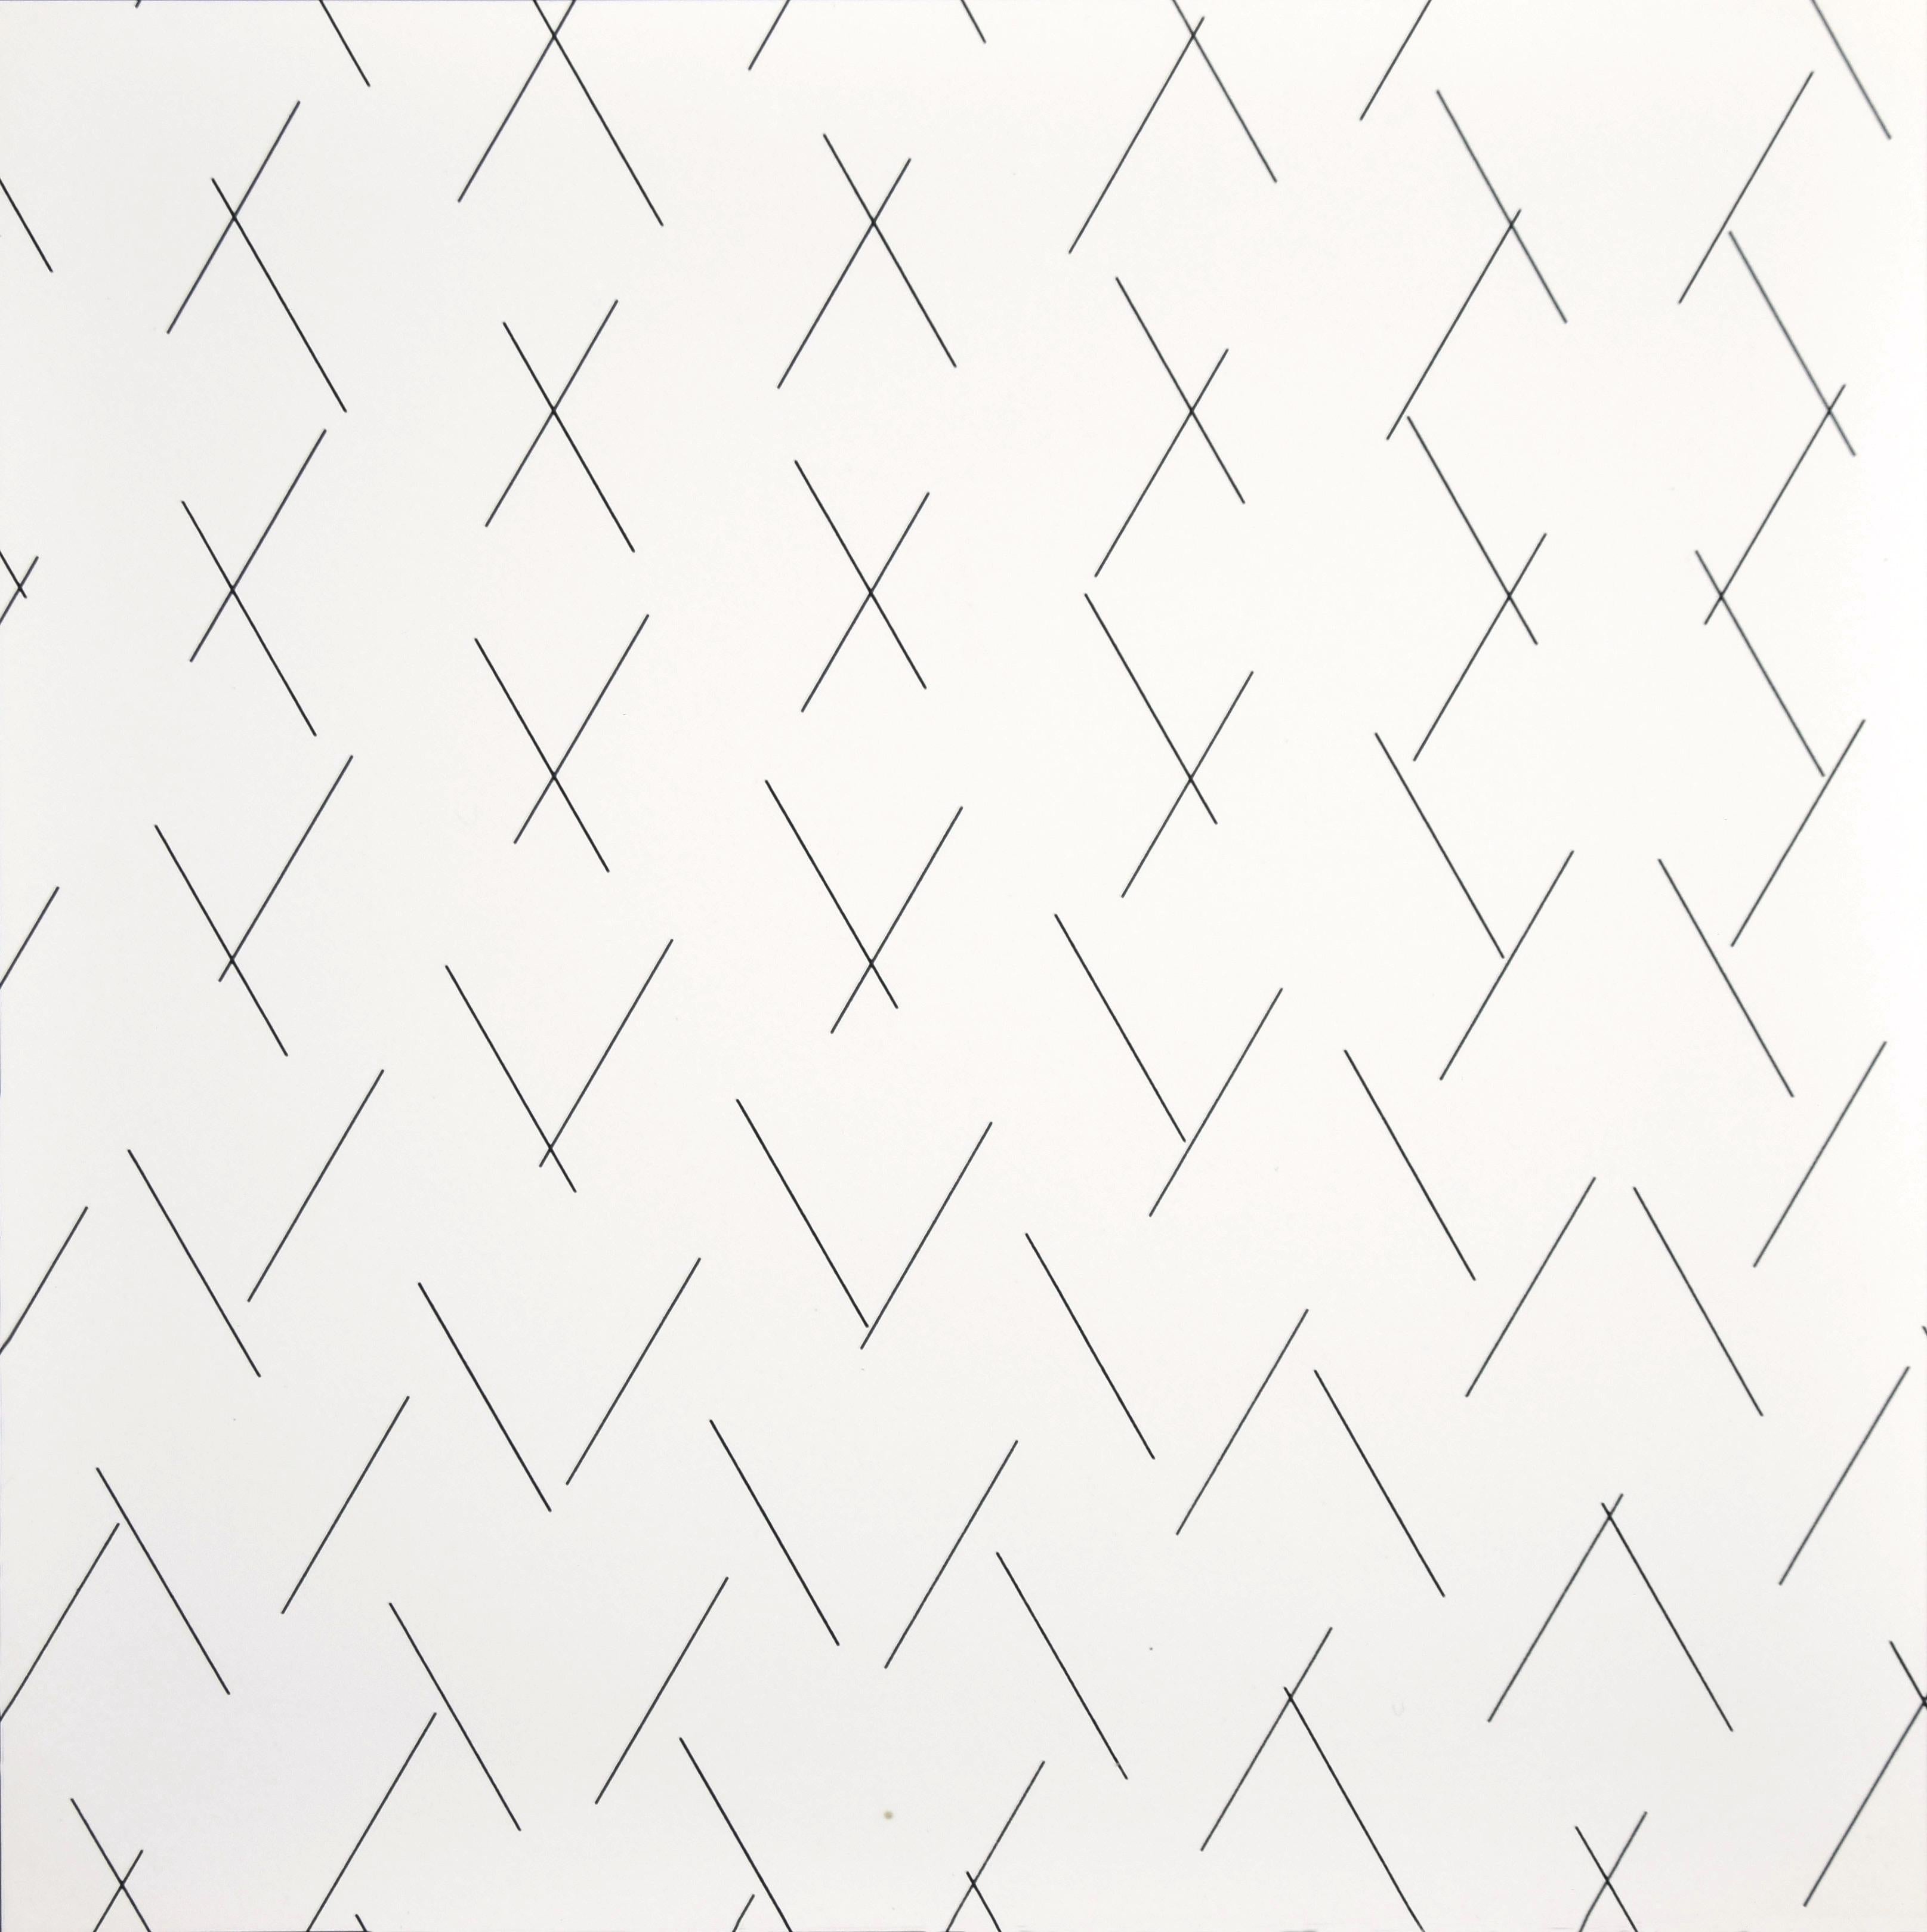 Intersecting Lines - Plate 3 - Screen Print by François Morellet - 1975